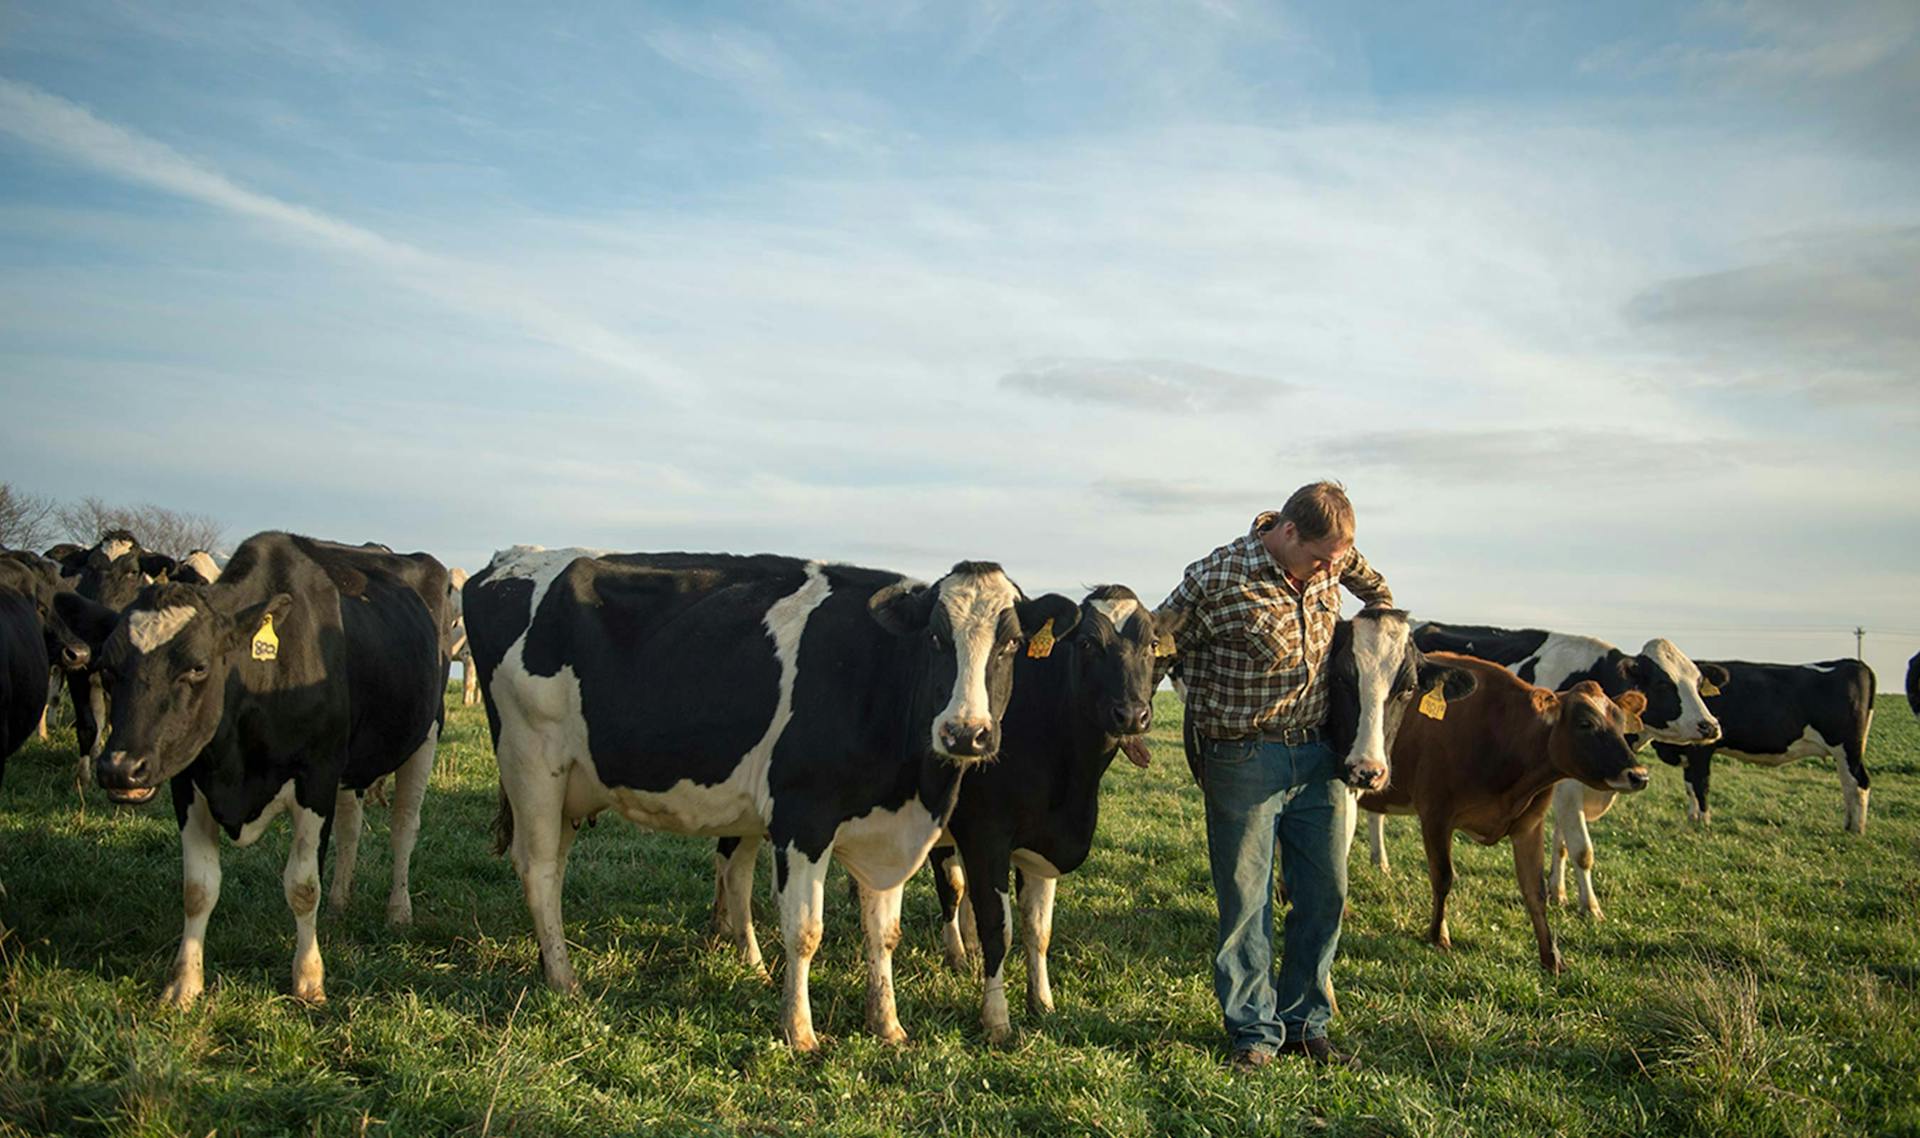 A farmer standing in a herd of cows while embracing one of them.